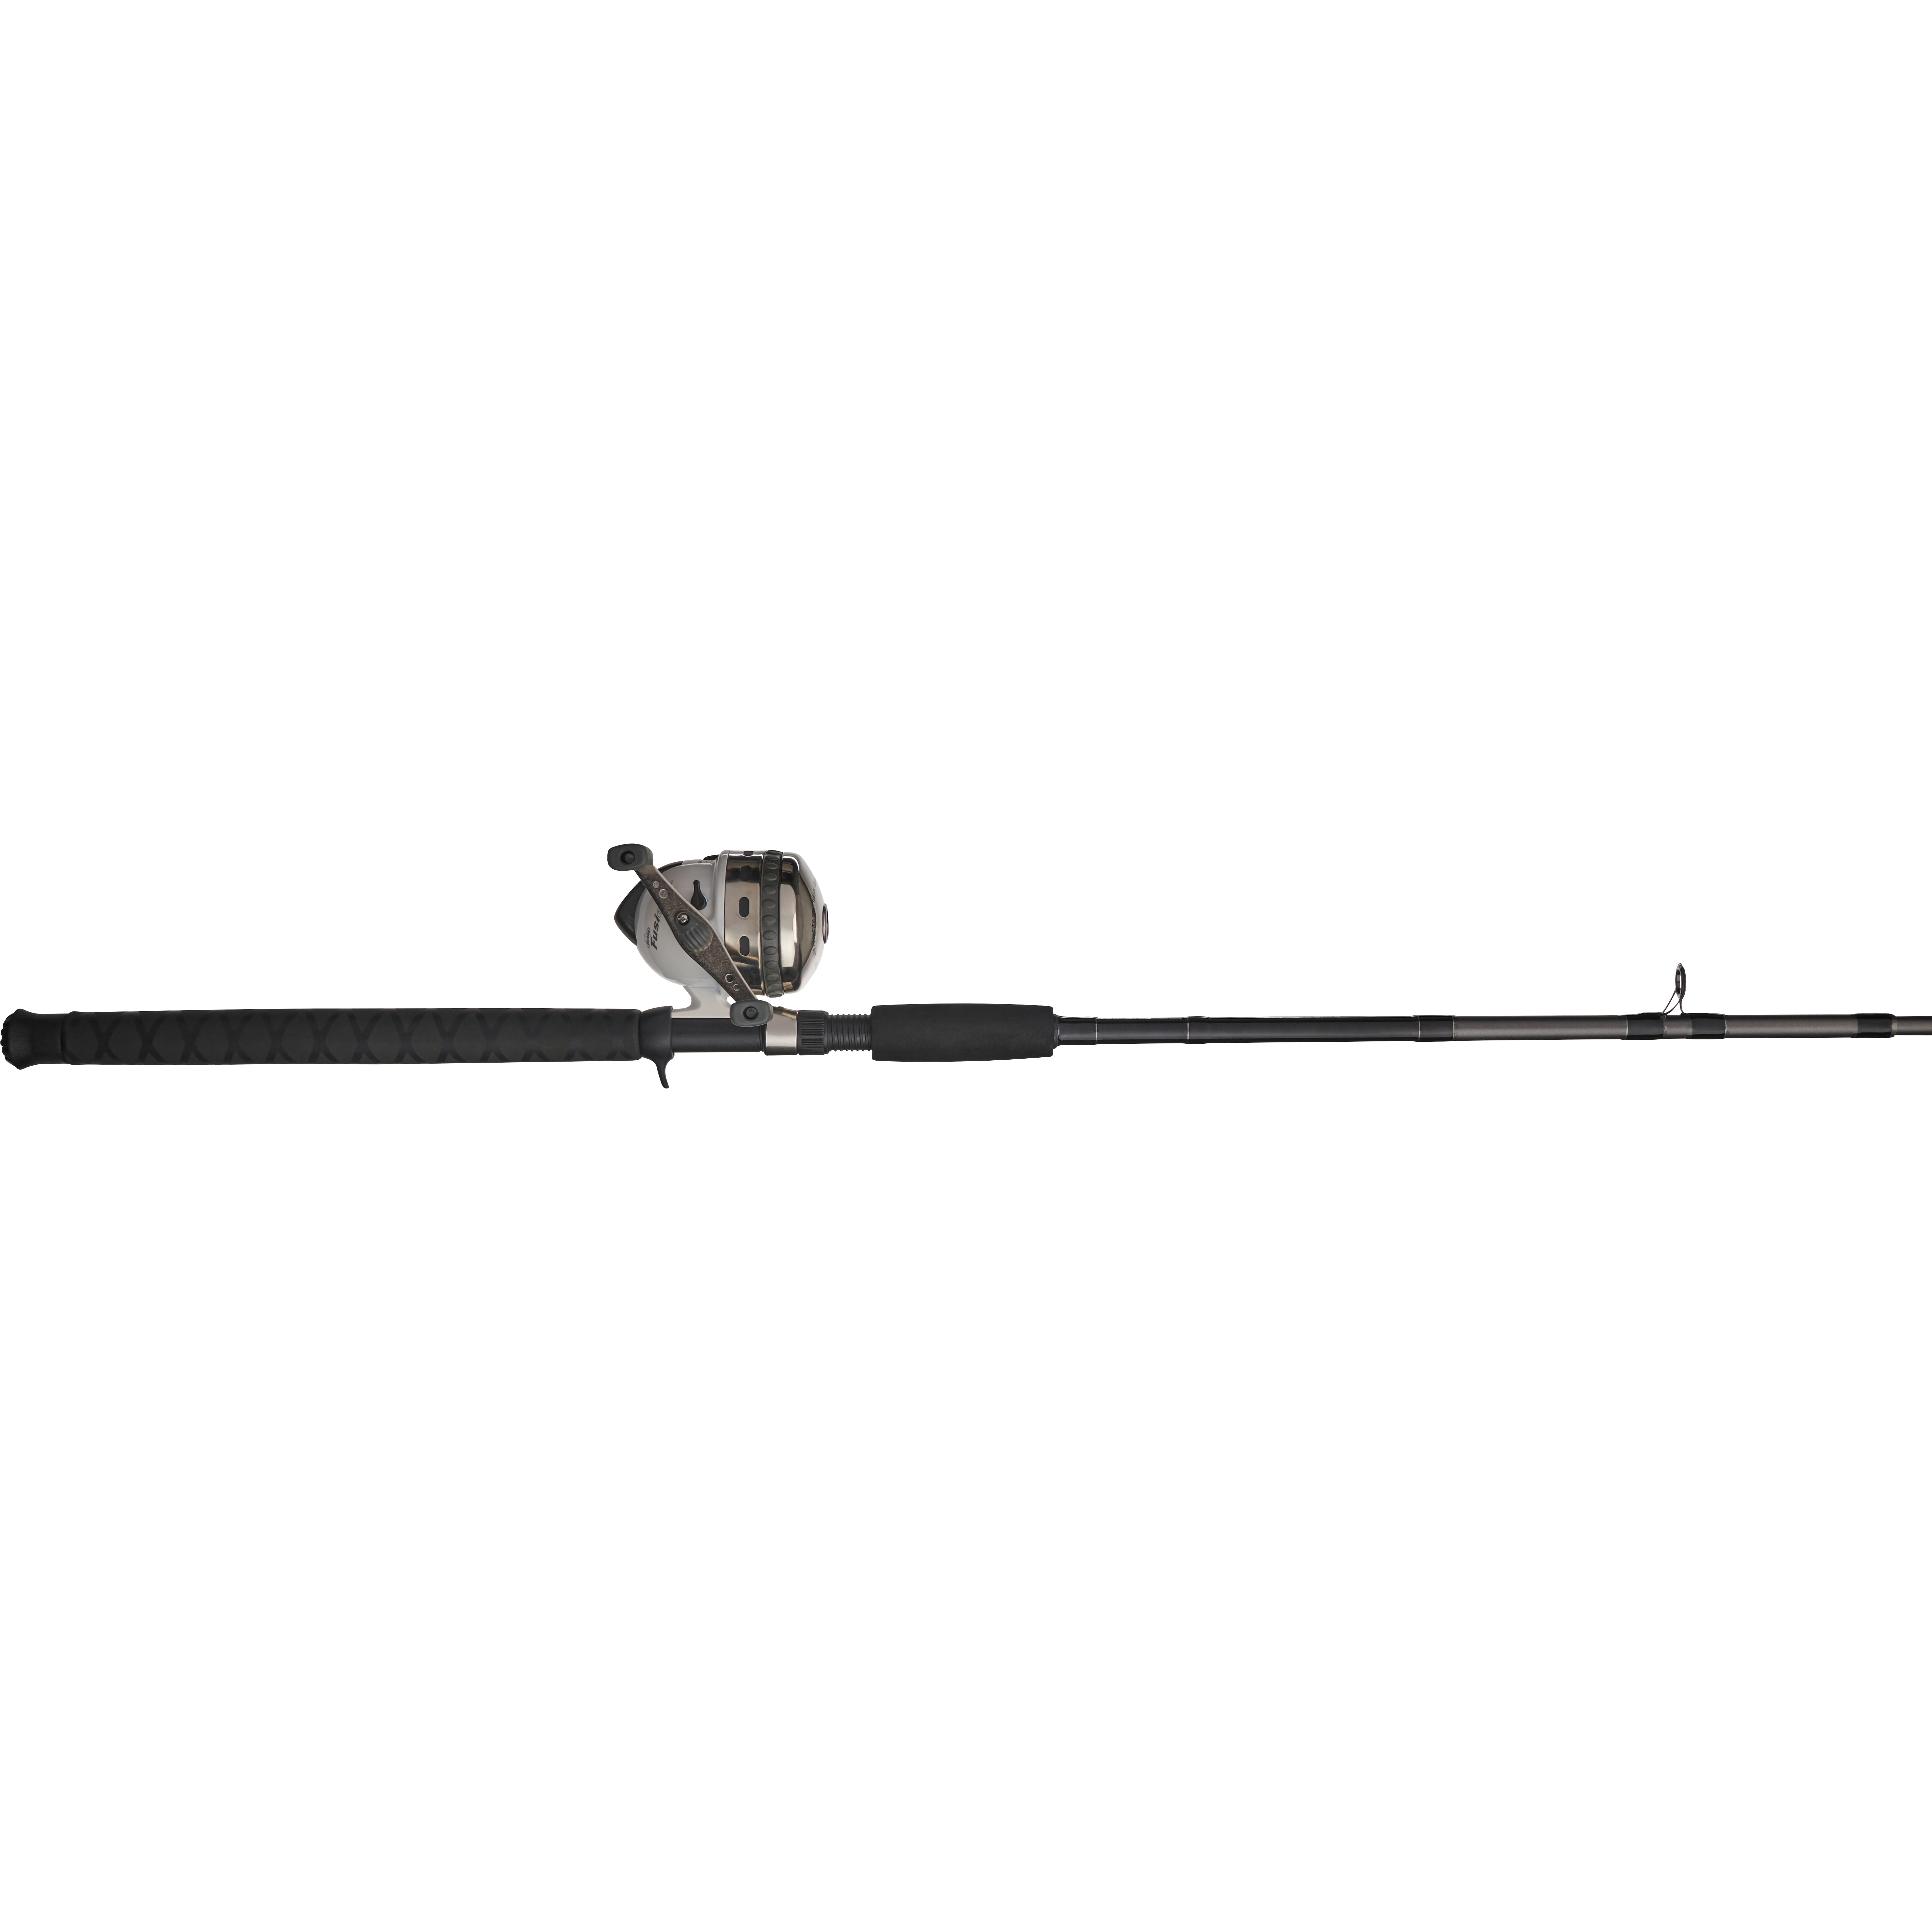 Reduced Price in Fishing Rod & Reel Combos